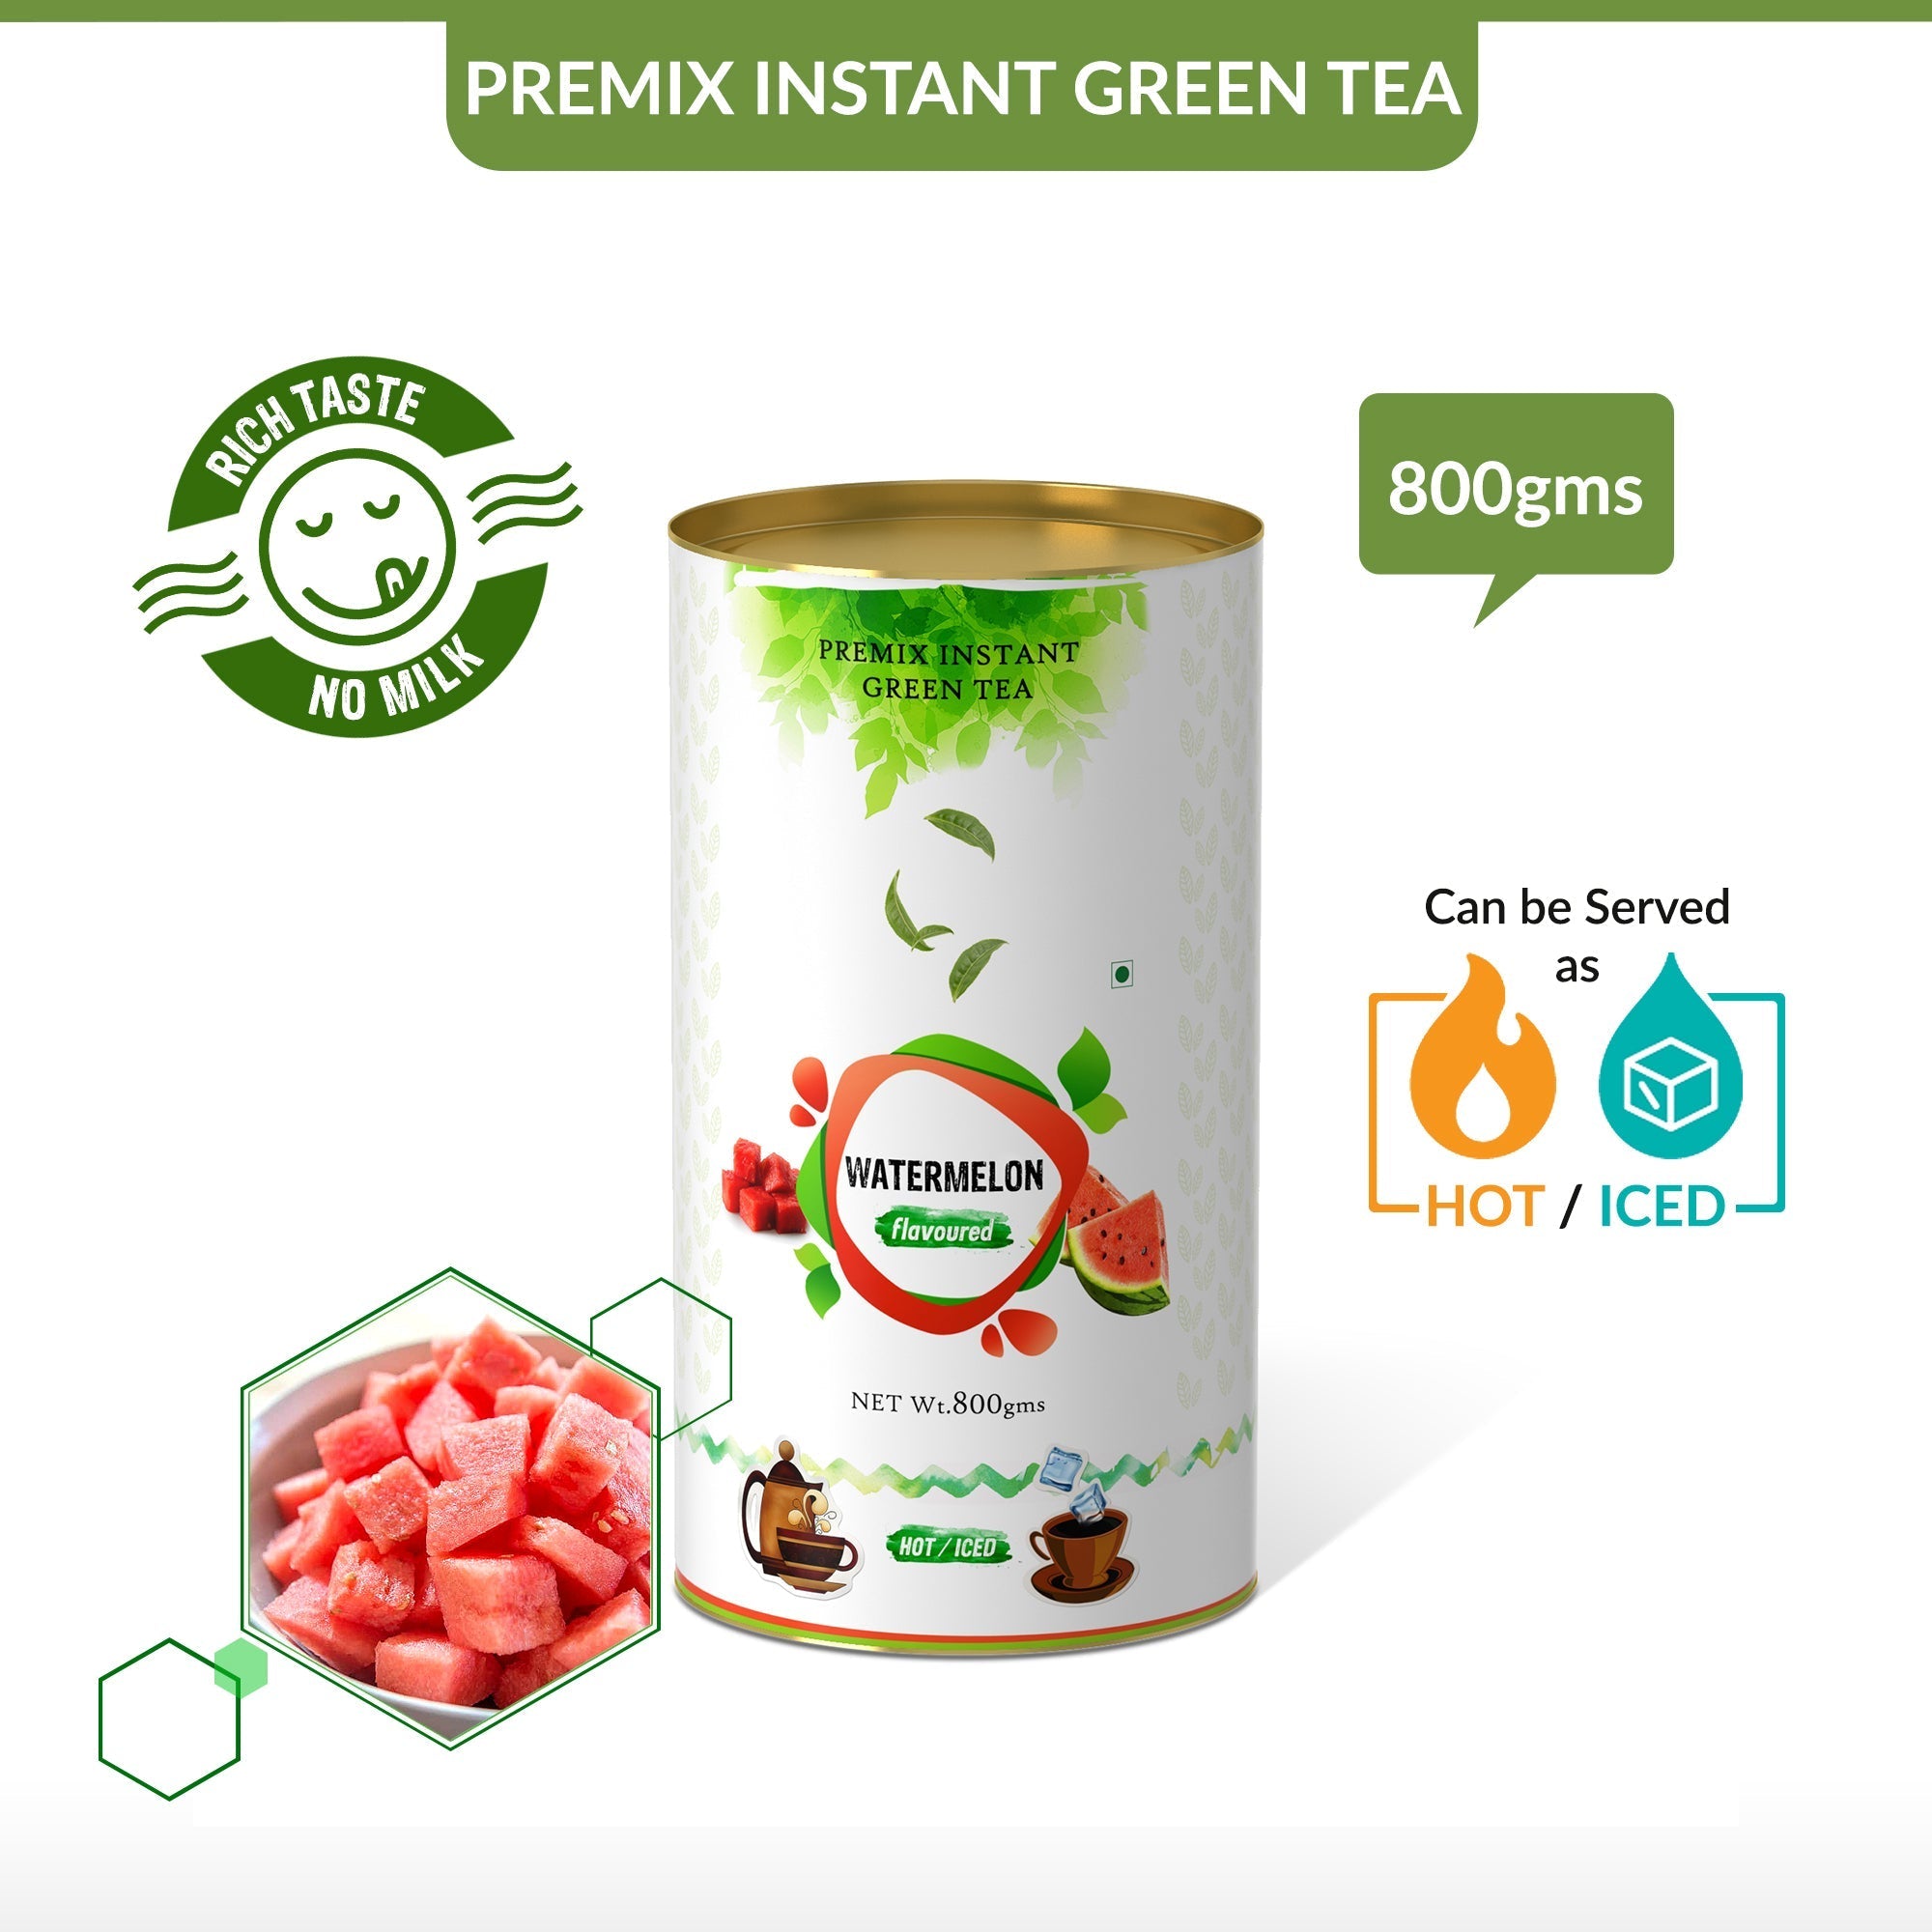 Watermelon Flavored Instant Green Tea - 800 gms